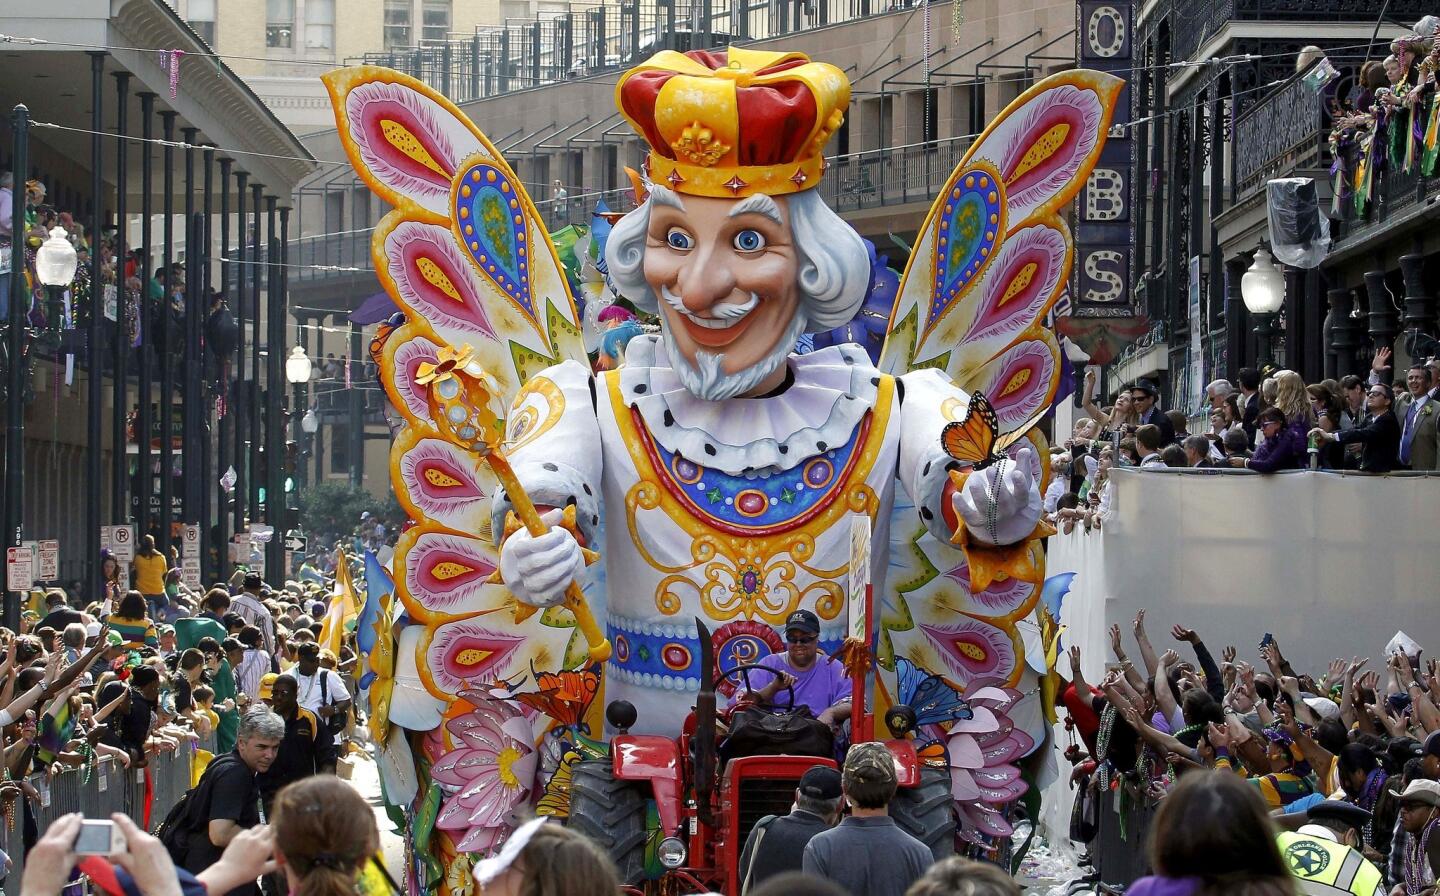 Mardi Gras is the queen of festivals in New Orleans, and Rex is the king of carnival parades. Rex makes its way through the Central Business District of New Orleans.